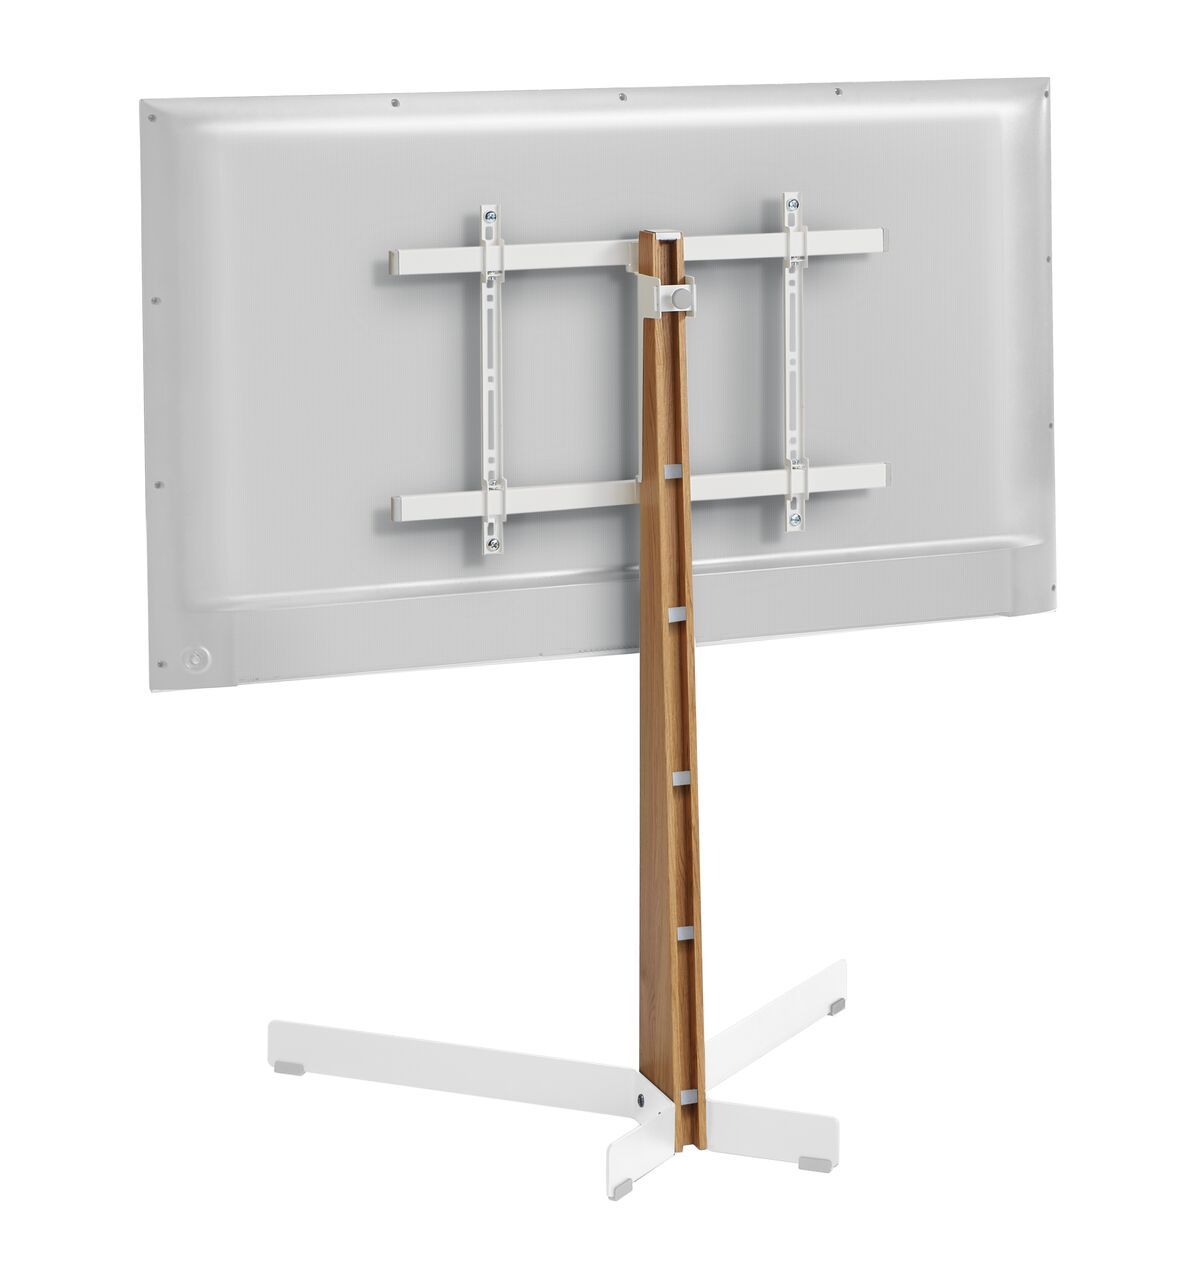 Vogel's TVS 3695 TV Floor Stand (white) - Suitable for 40 up to 77 inch TVs up to Application